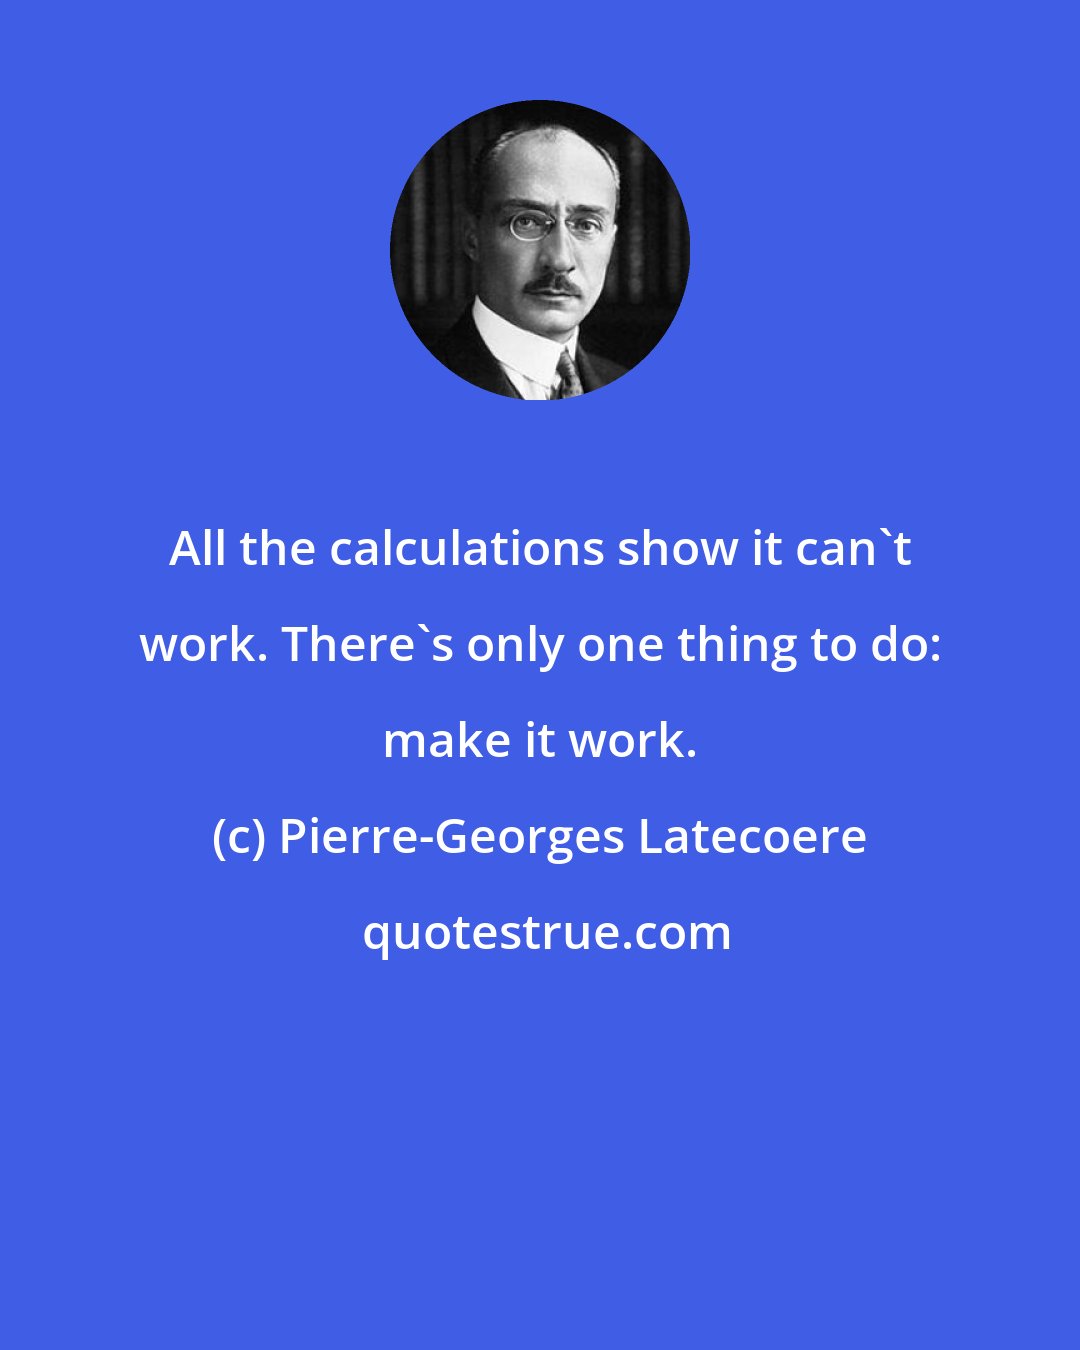 Pierre-Georges Latecoere: All the calculations show it can't work. There's only one thing to do: make it work.